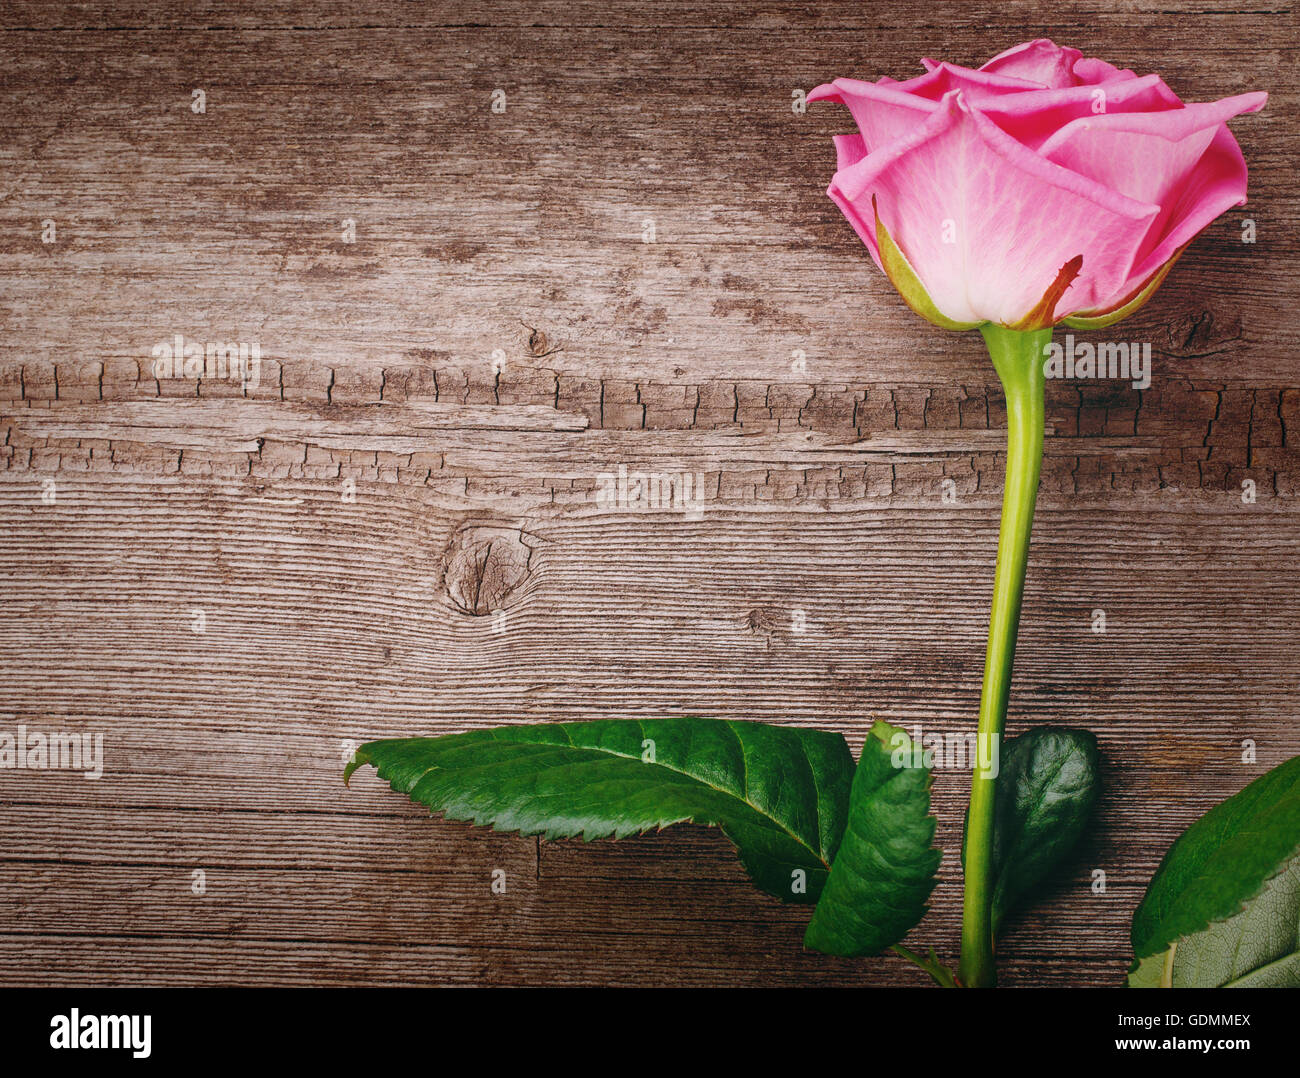 pink rose head on the wooden background Stock Photo